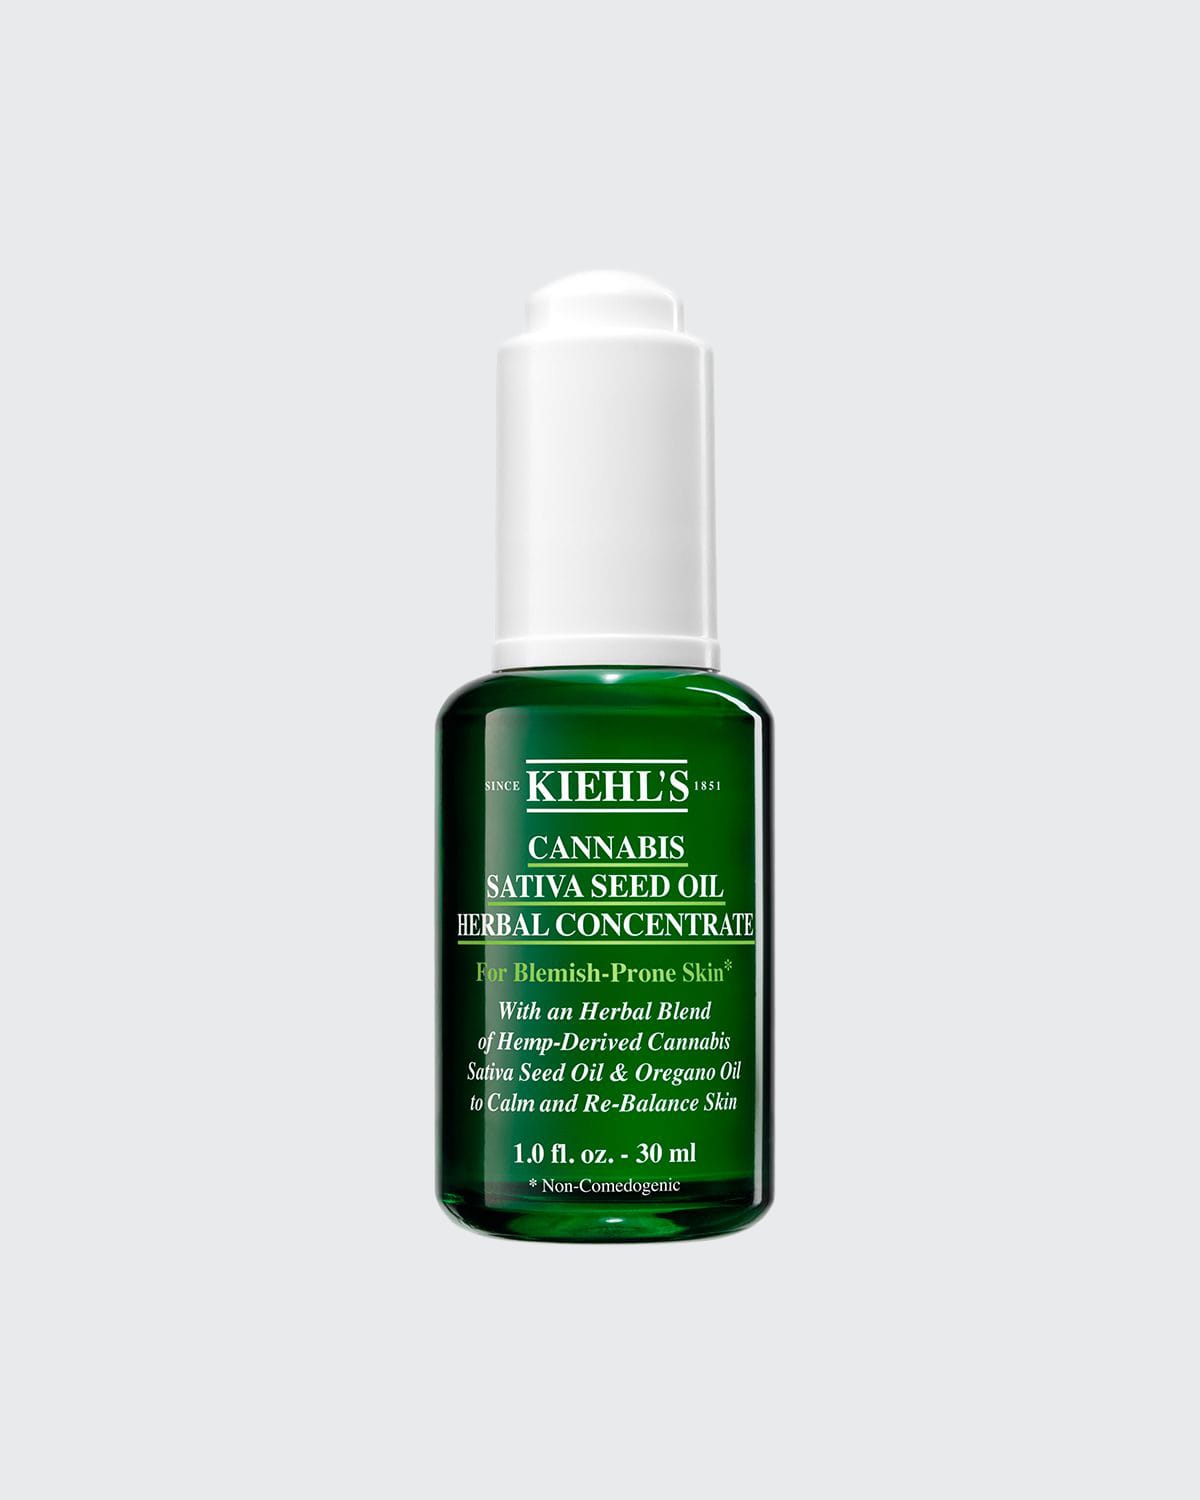 Kiehl's Since 1 oz. Cannabis Sativa Seed Oil Herbal Concentrate